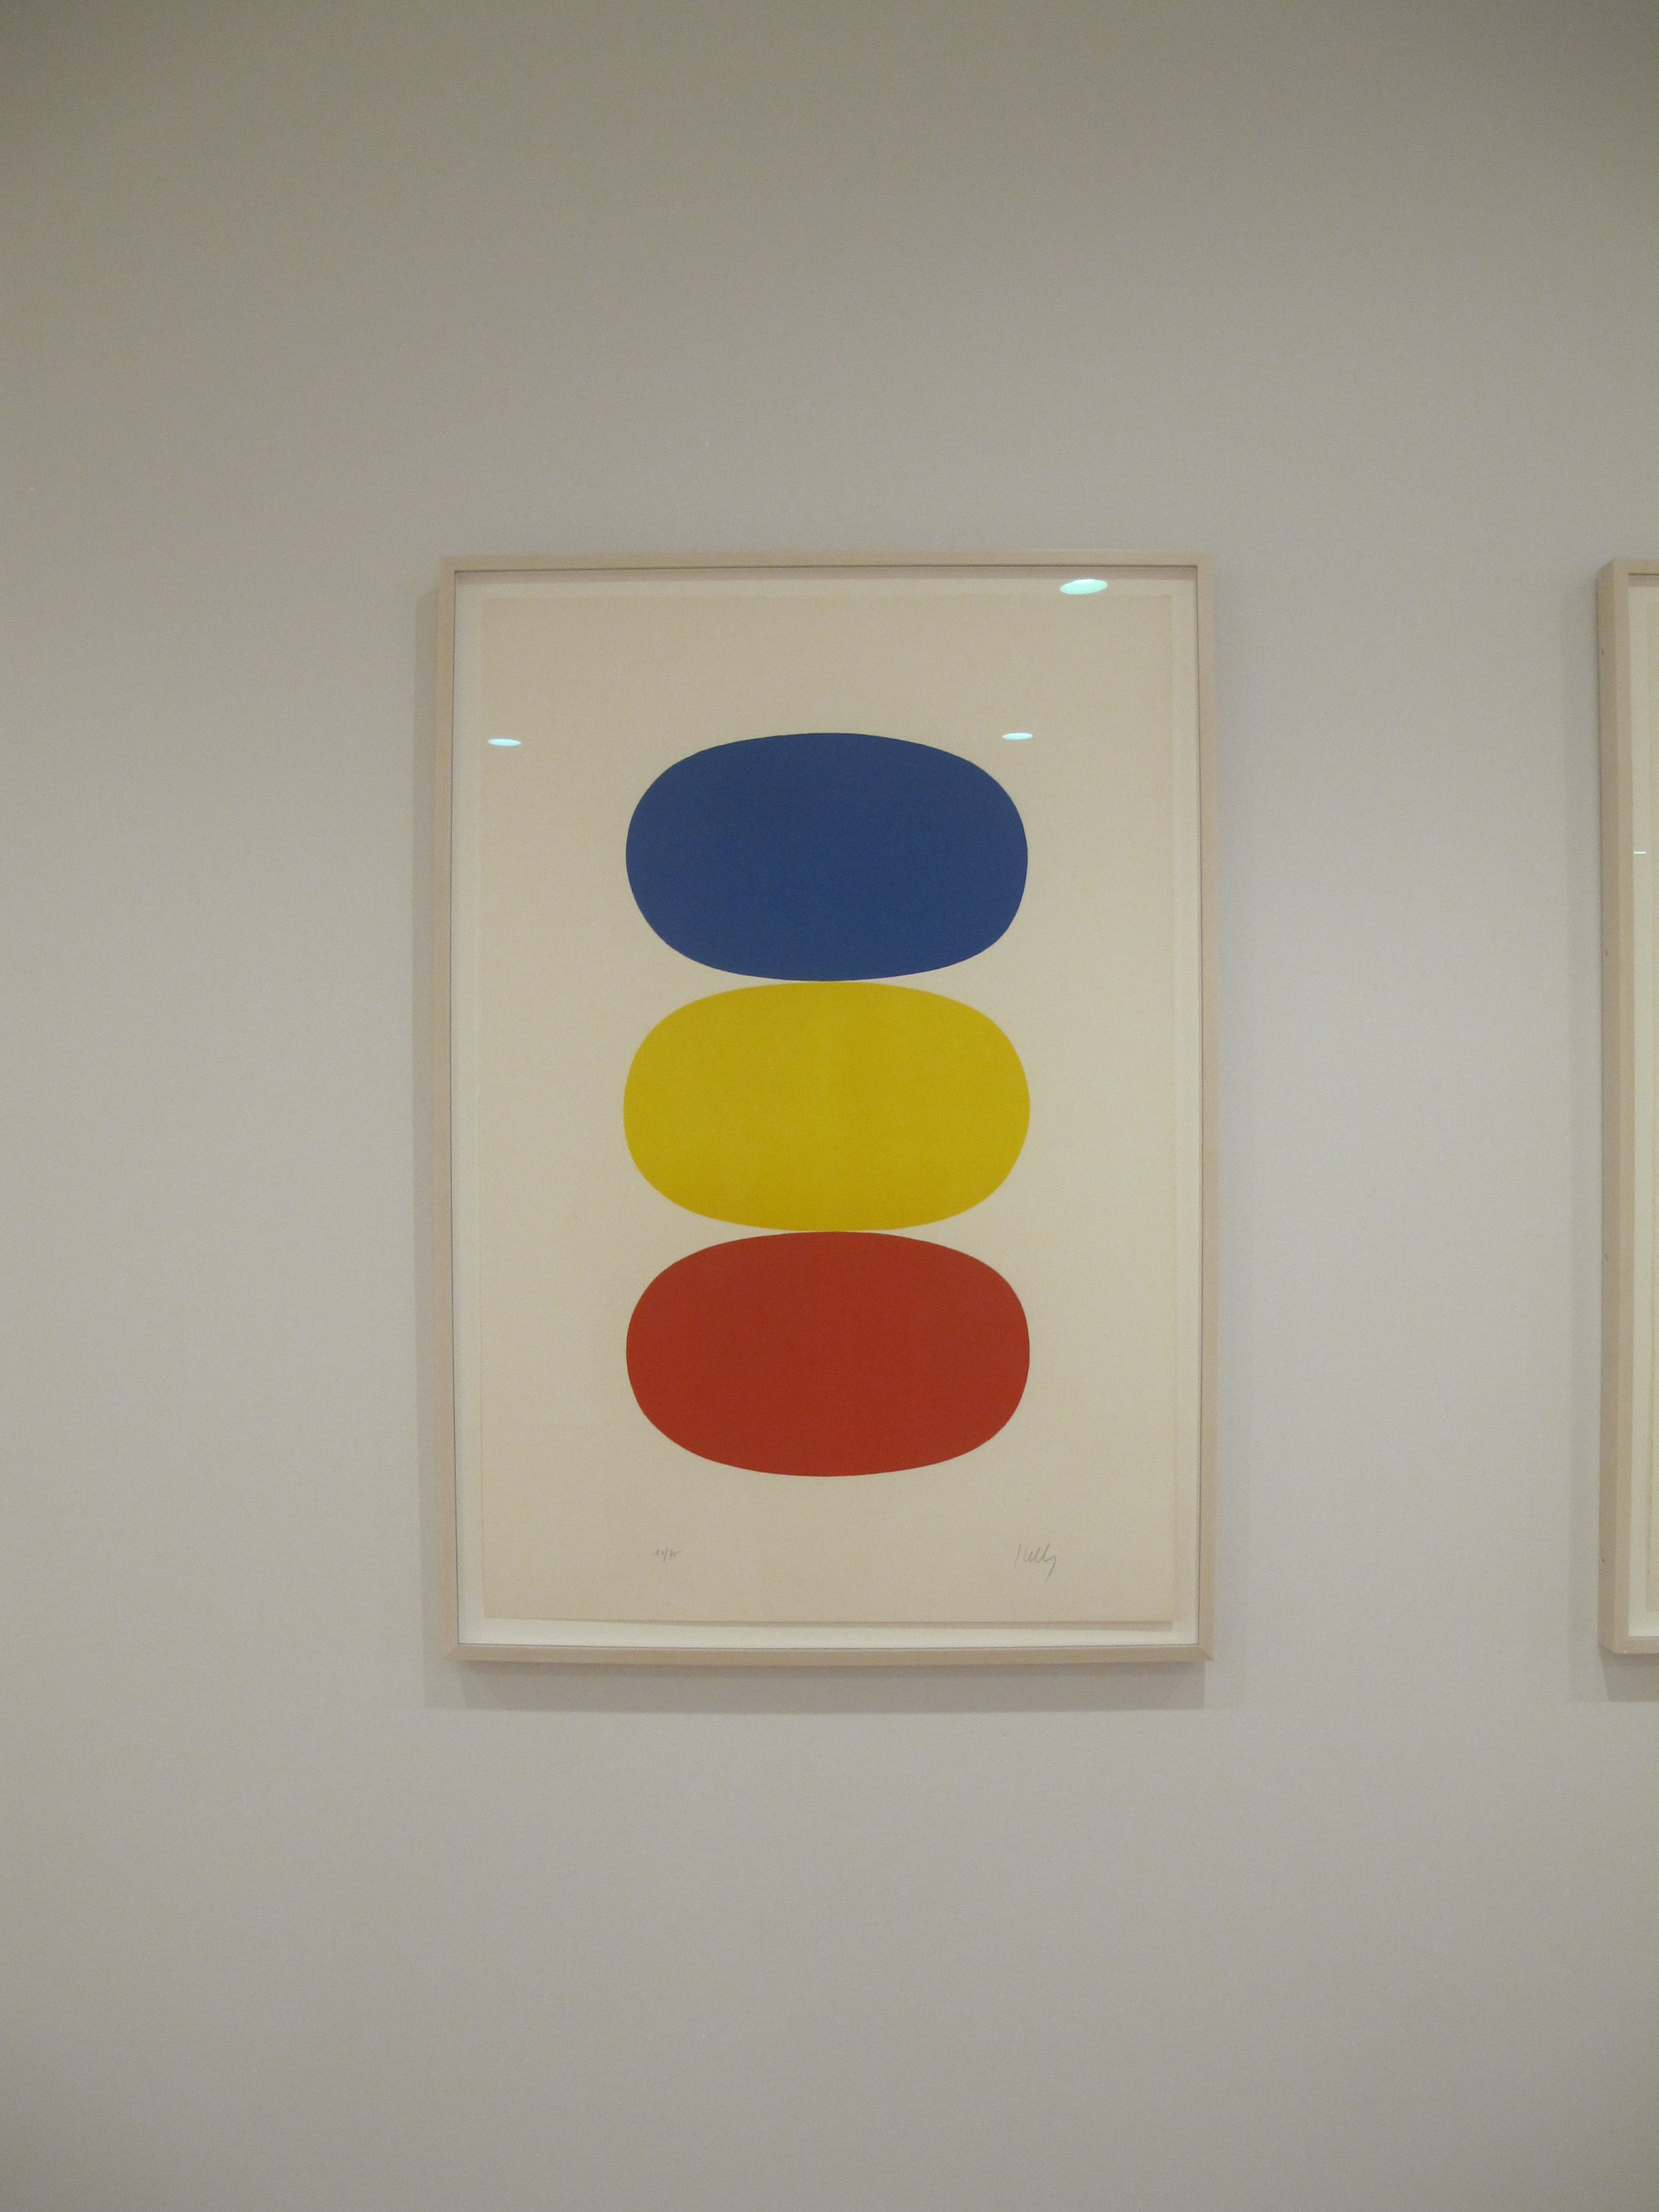 Blue and Yellow and Red-Orange, Ellsworth Kelly, 1964-65. One of 27 color lithographs. 